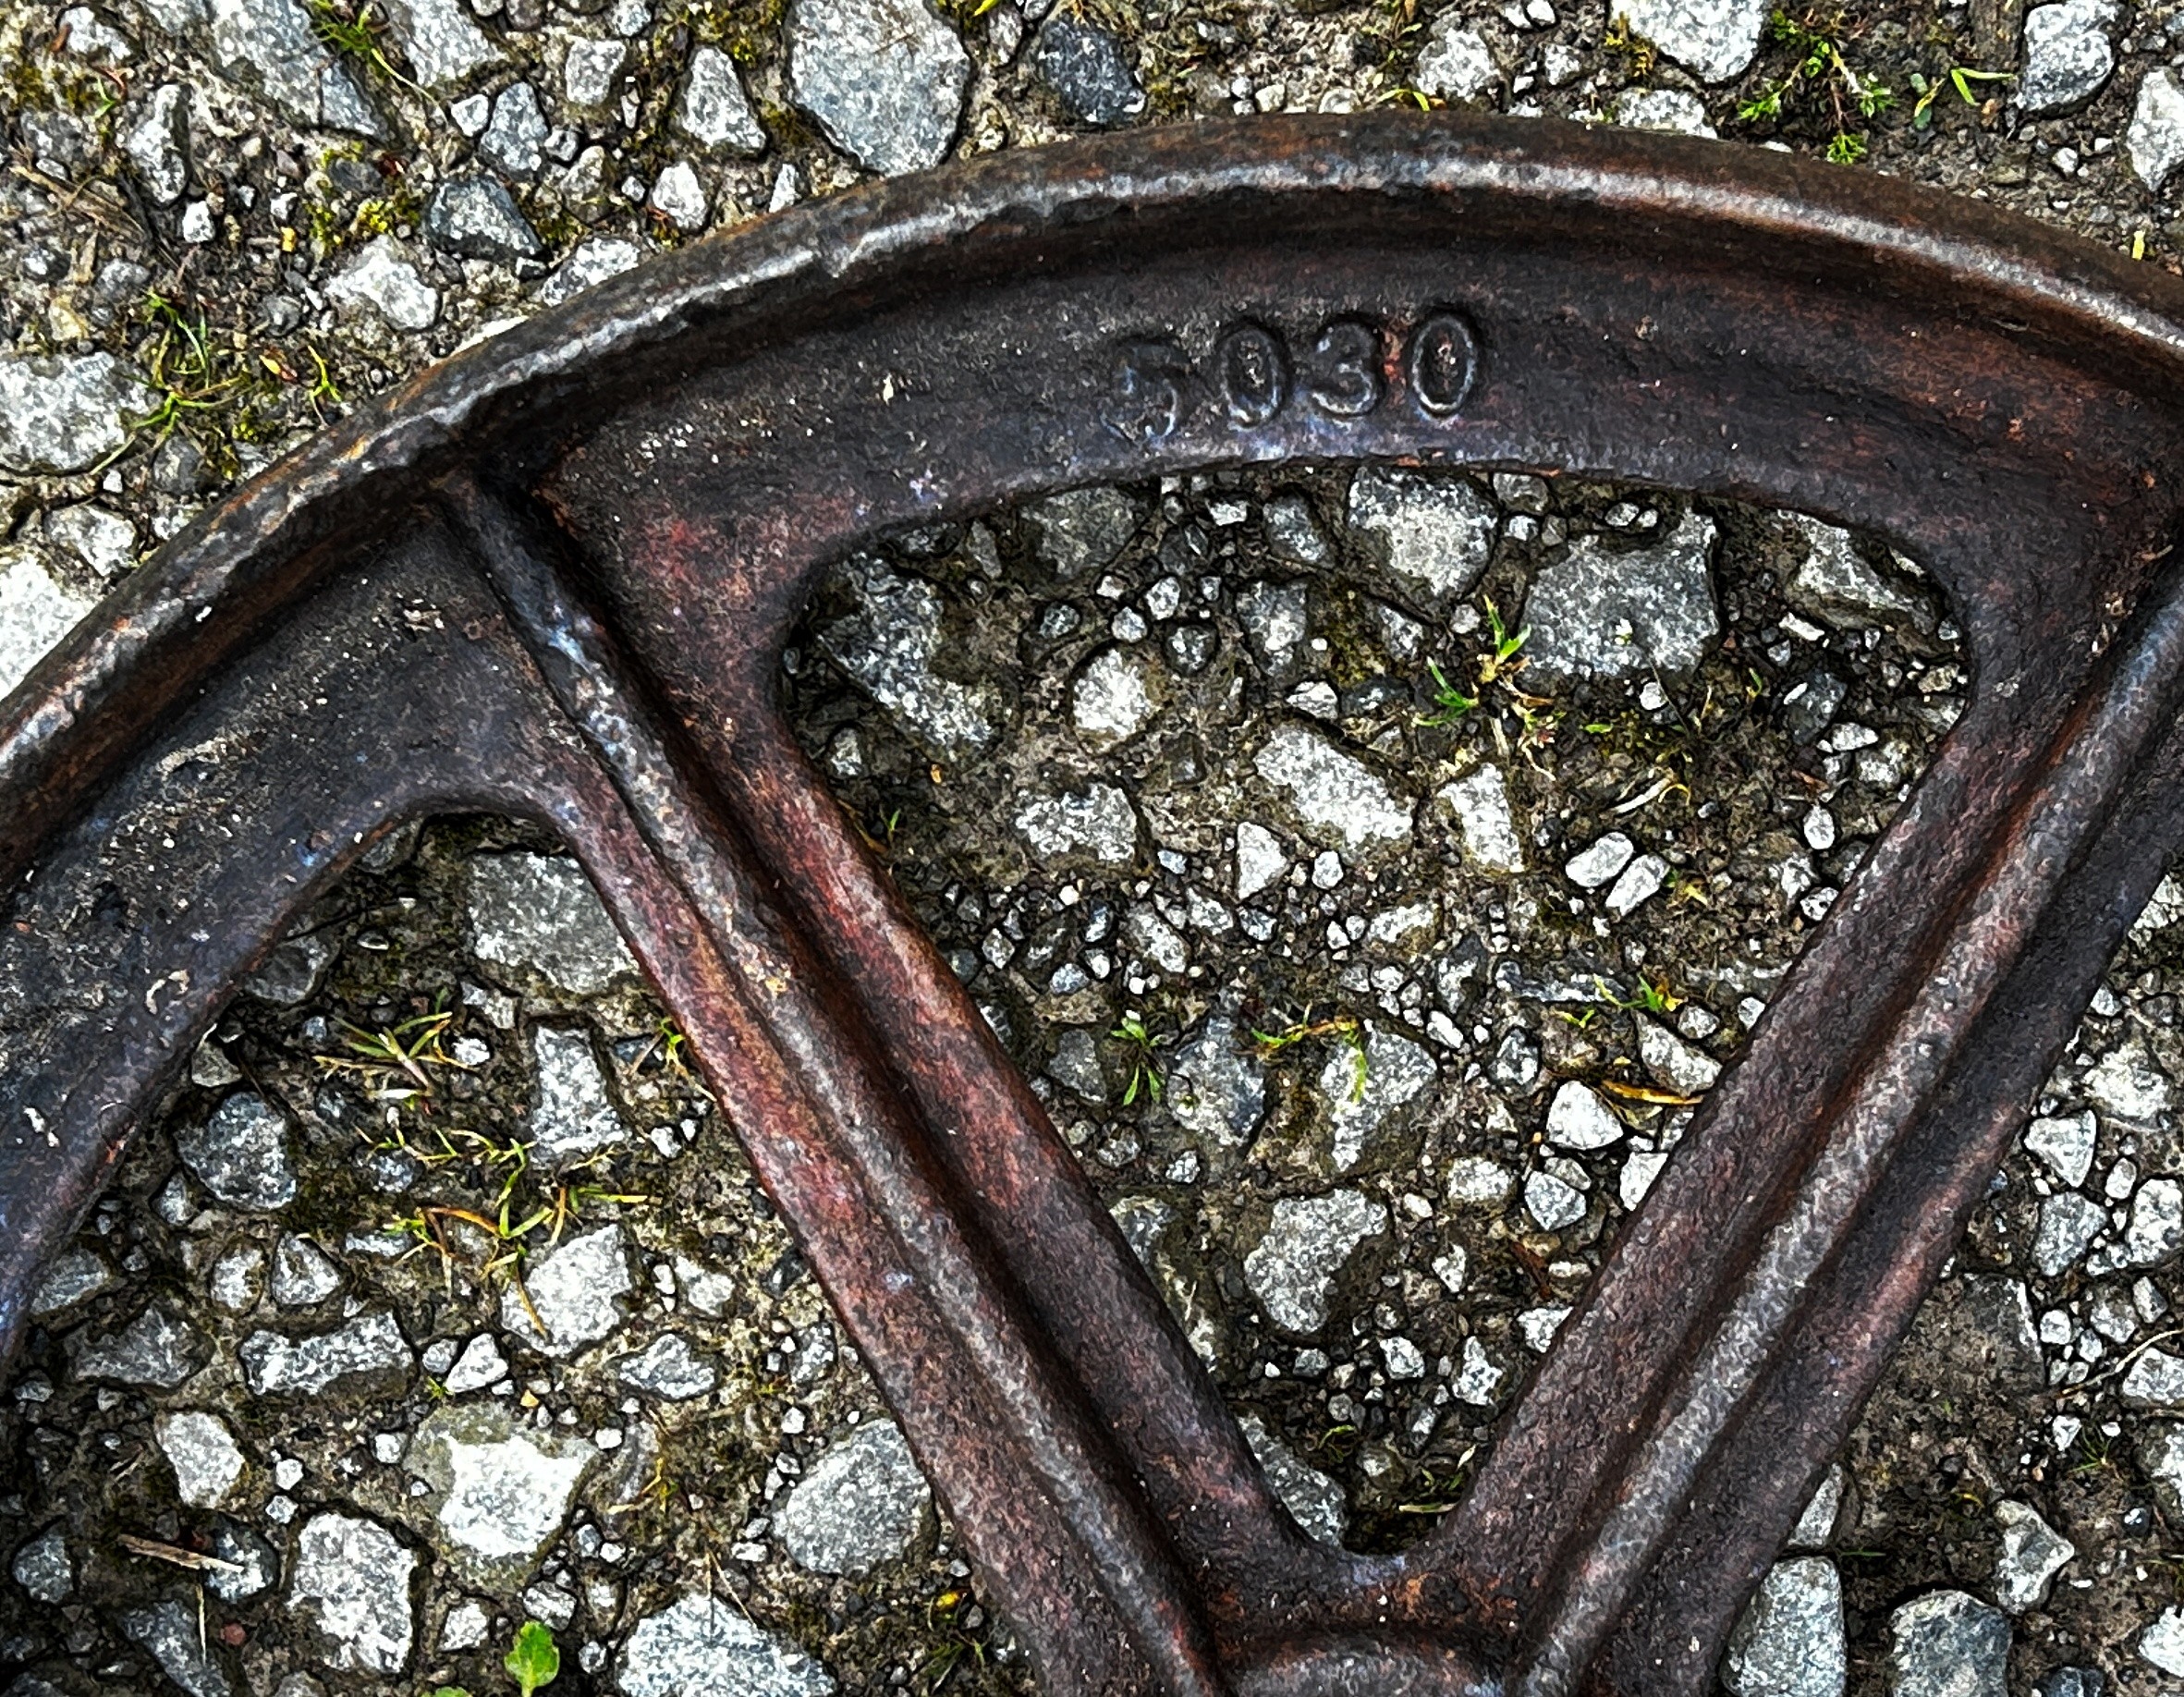 A pair of vintage cast iron implement wheels stamped with numbers 9340, 44 cm diameter - Image 3 of 4